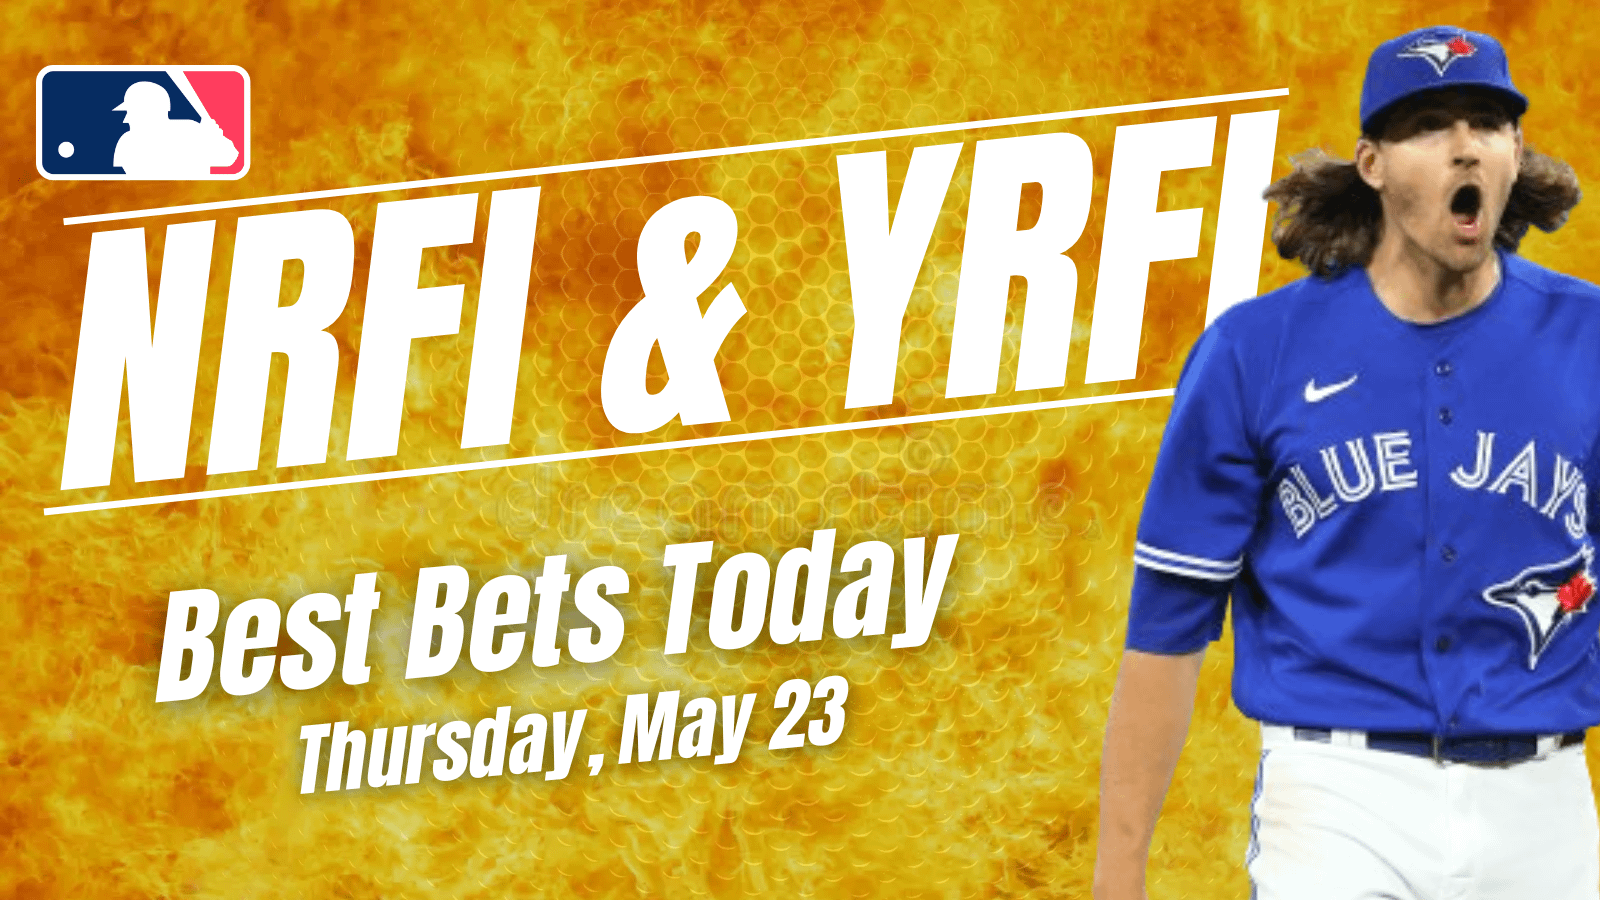 Looking for the top YRFI & NRFI bets today? We dive into the best no first inning bets for Thursday, May 23, including...